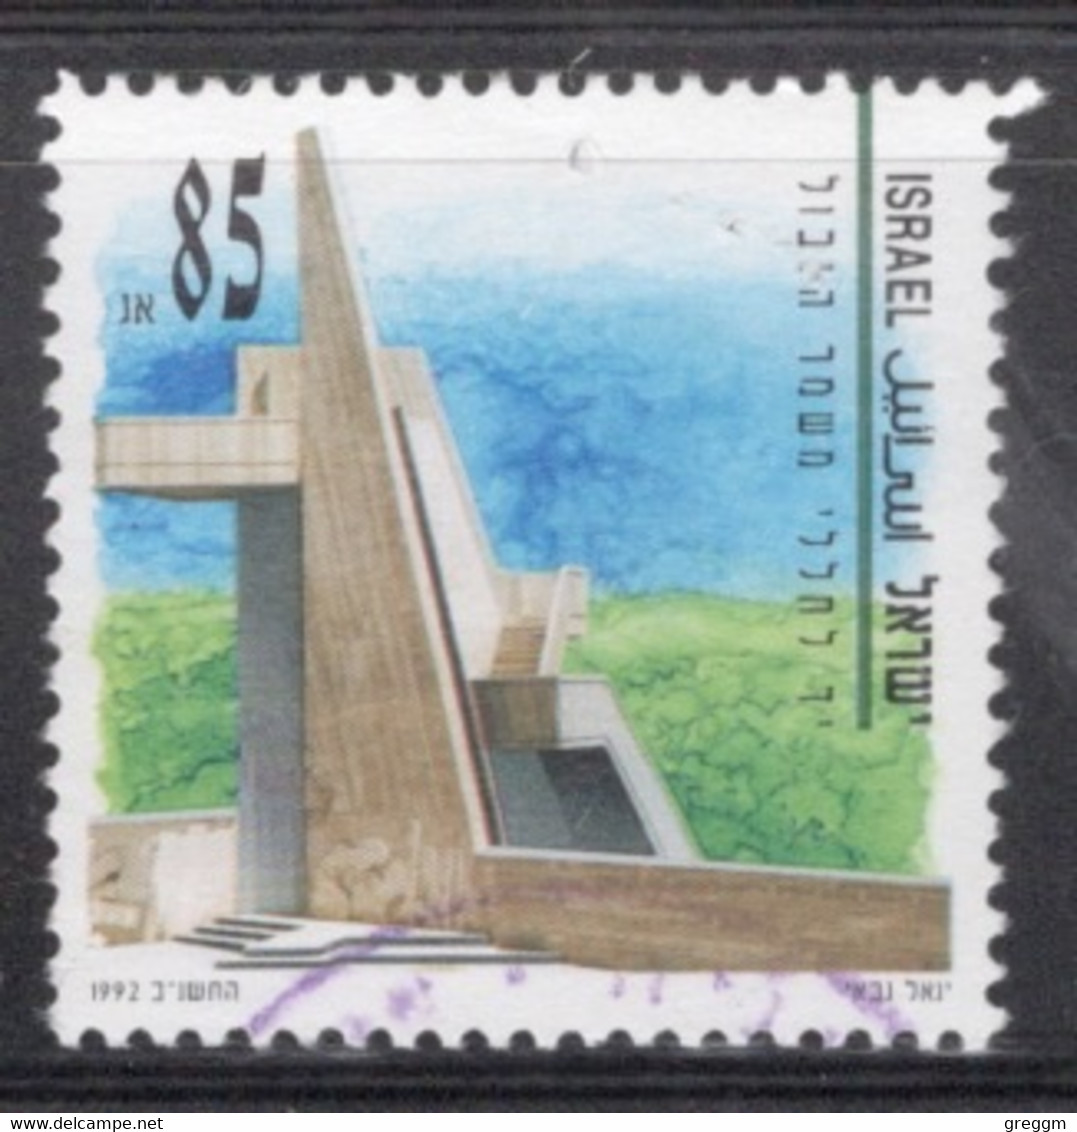 Israel 1992 Single Stamp From The Set Celebrating Memorial Day In Fine Used - Usati (senza Tab)